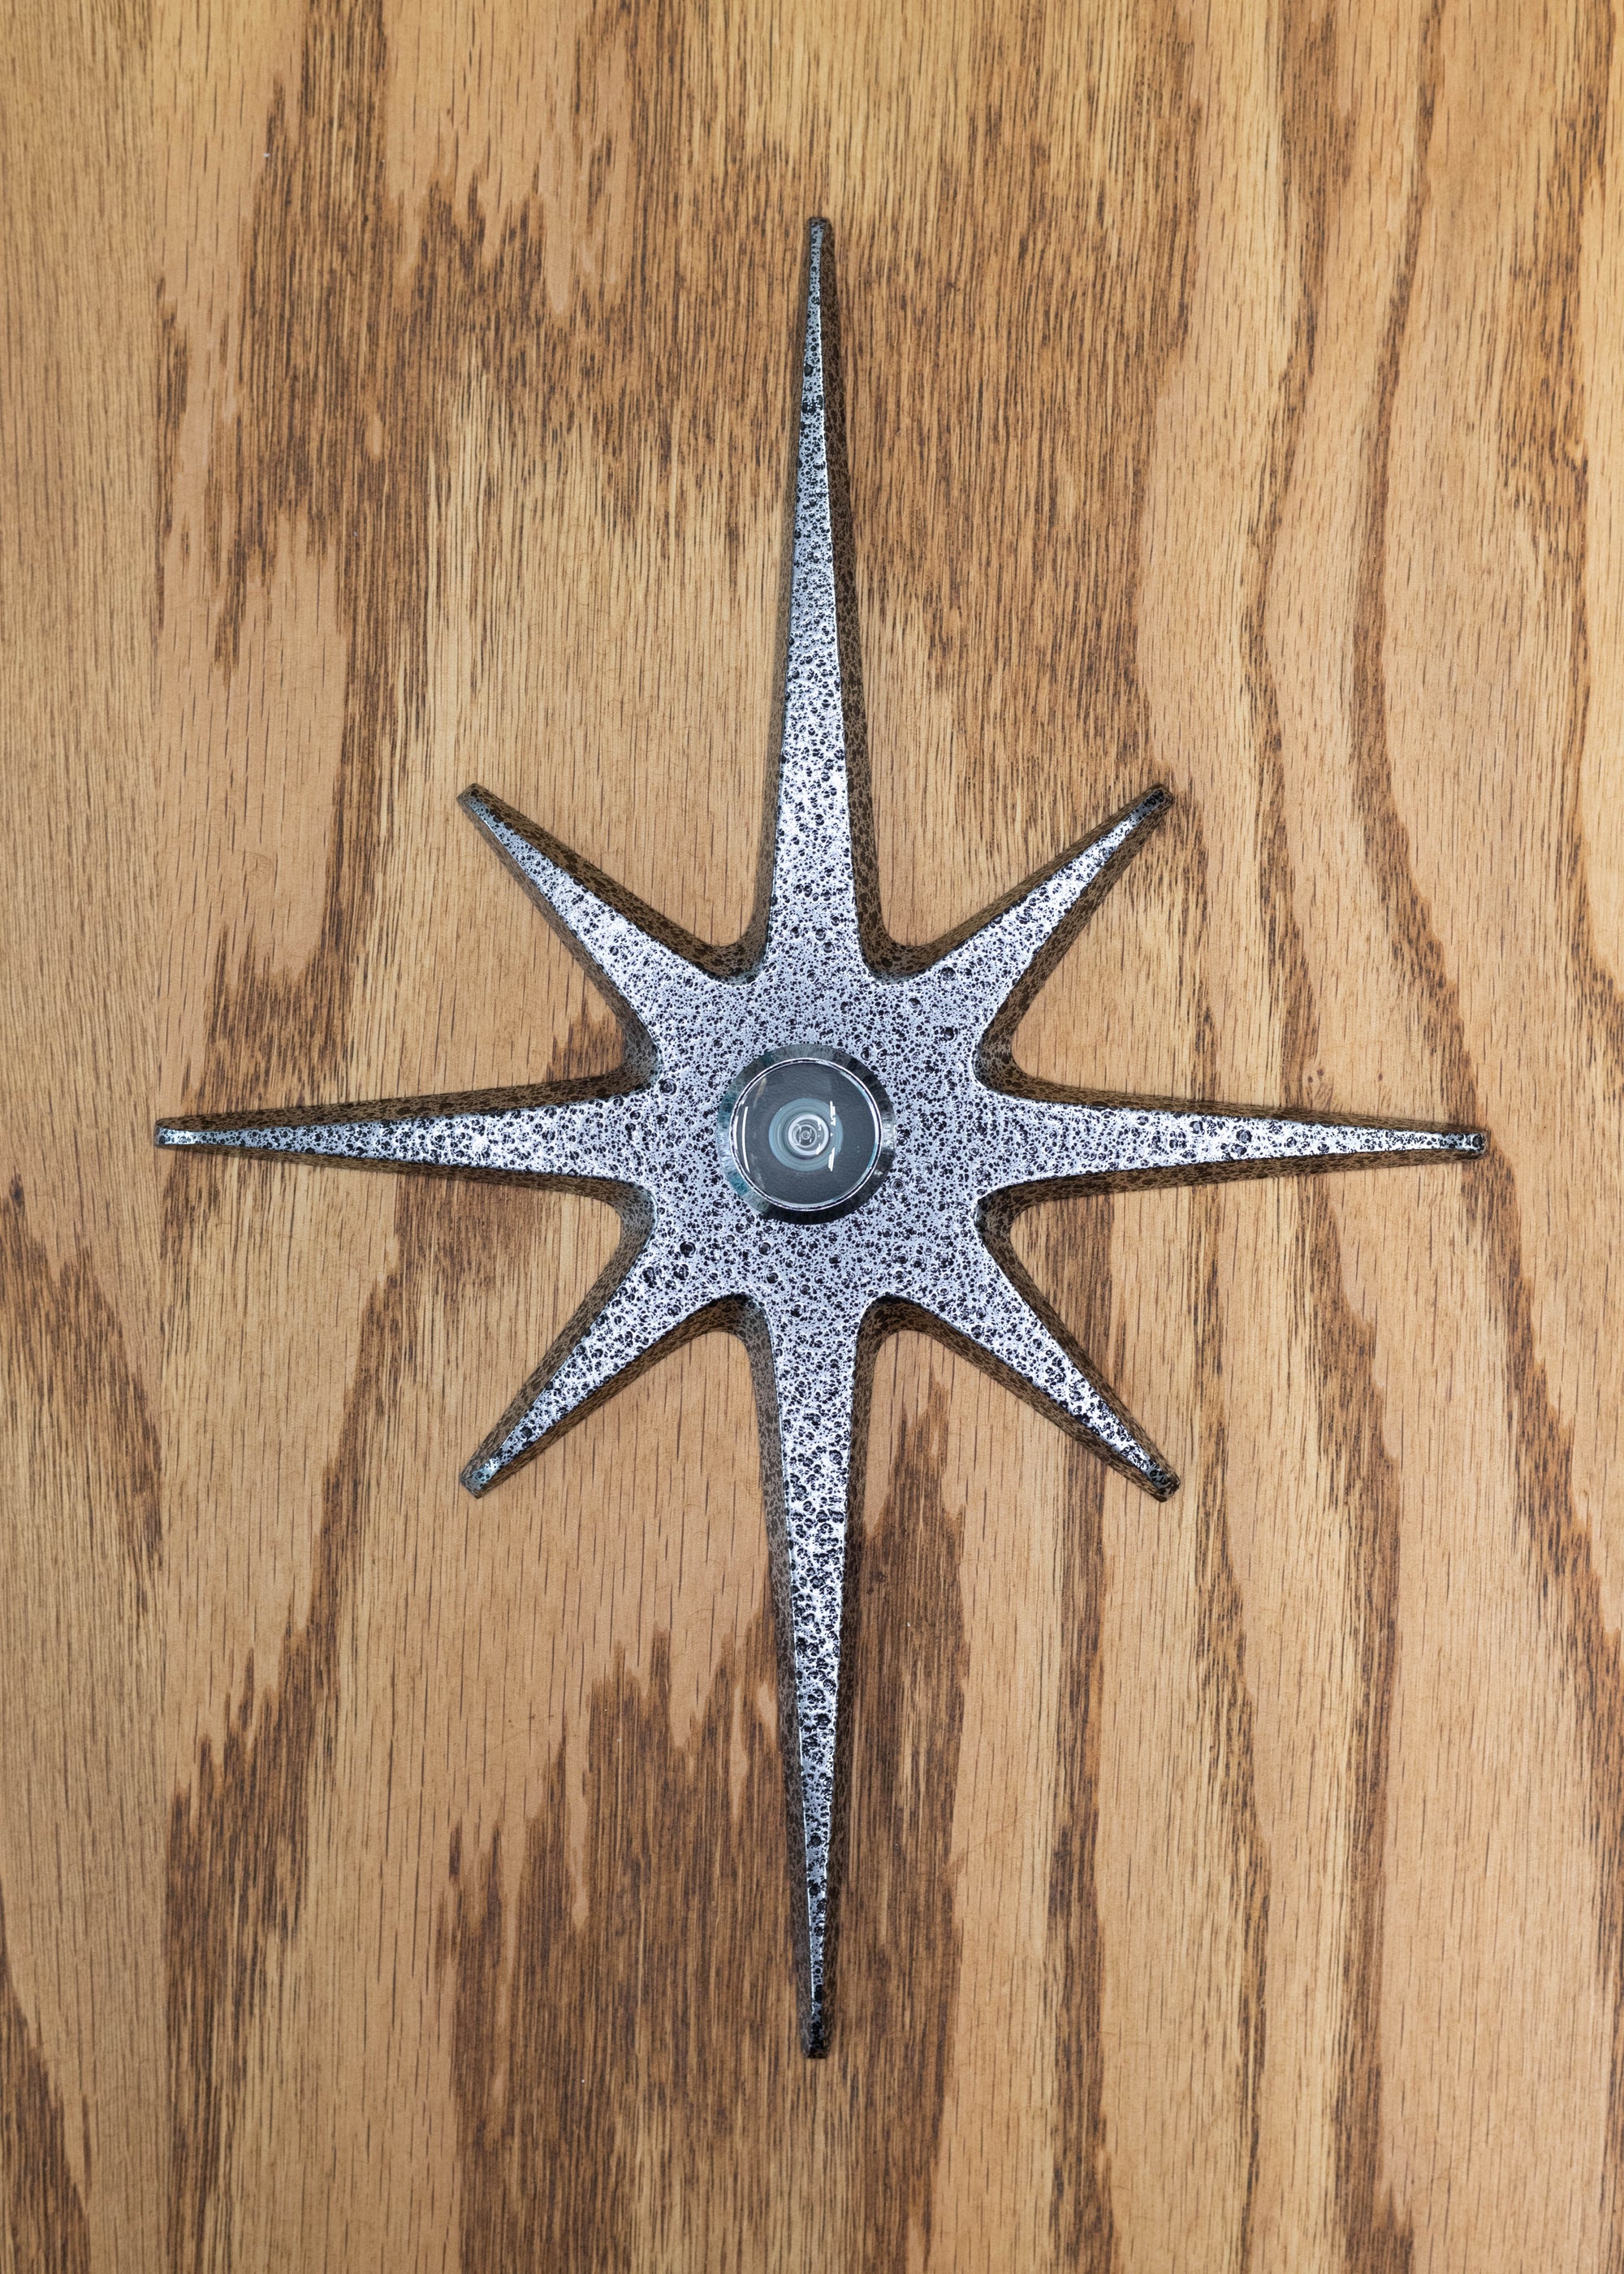 A large cast aluminum starburst with a peephole viewer at the center. The starburst has a black frost powder coating which is a silver and black crackled and pitted texture. The peephole is silver/chrome.